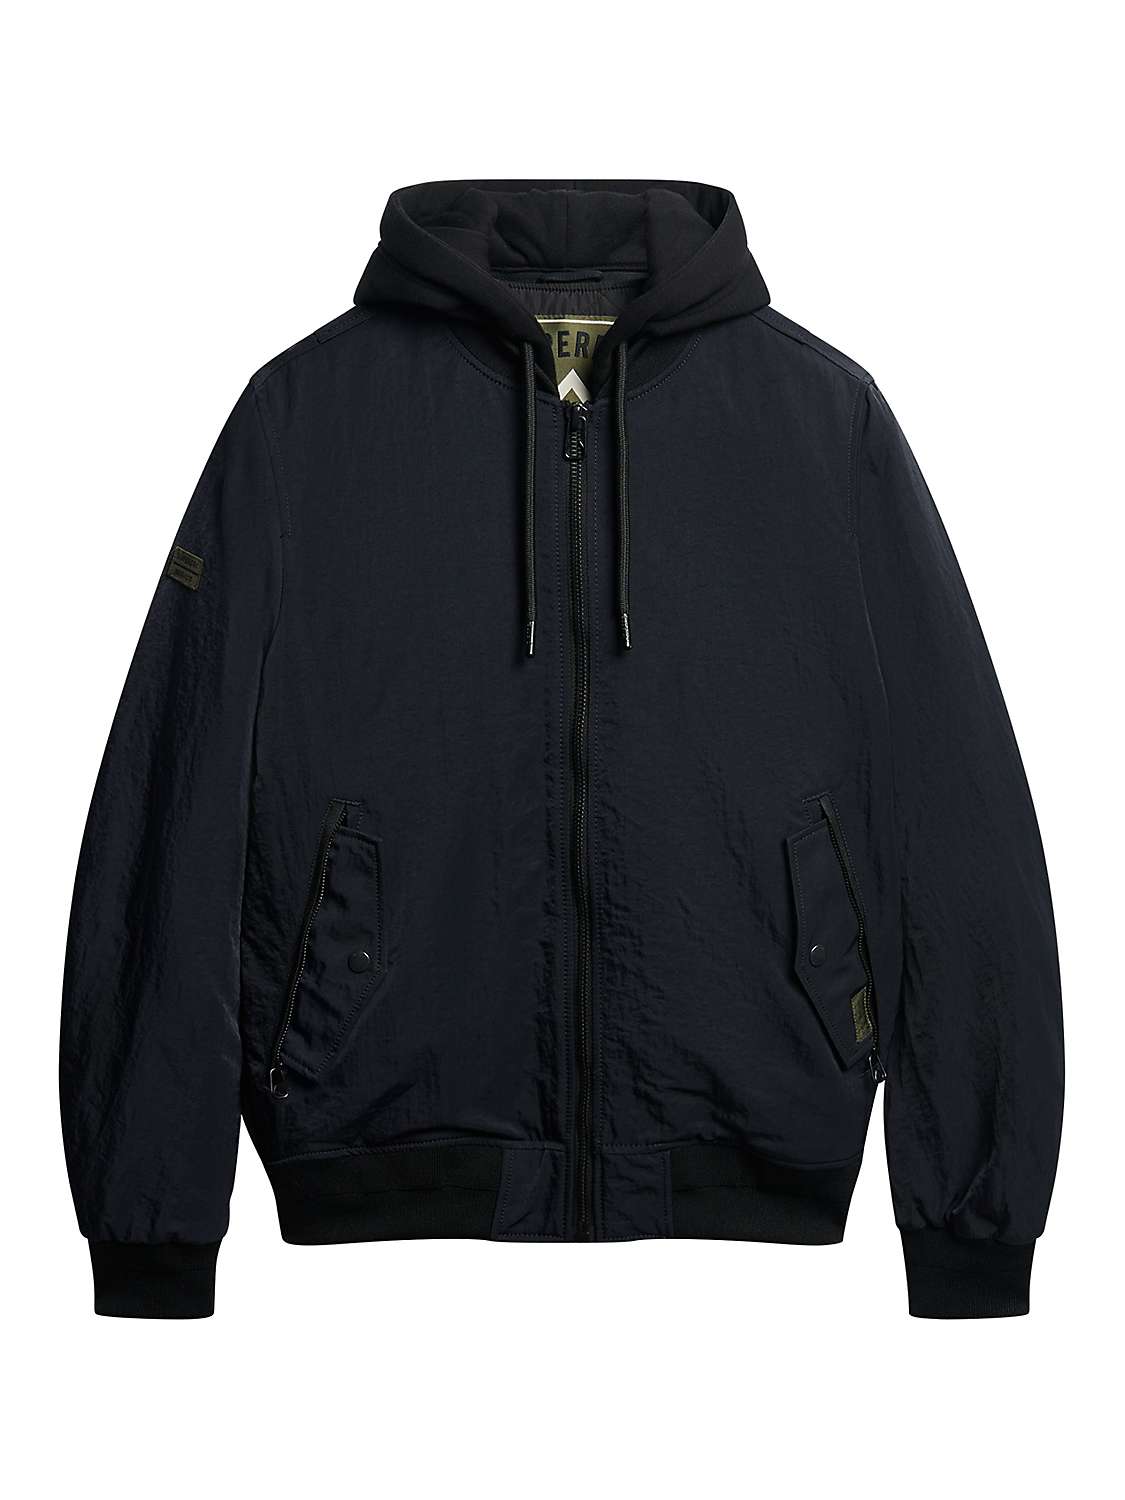 Buy Superdry Military Hooded MA1 Bomber Jacket Online at johnlewis.com